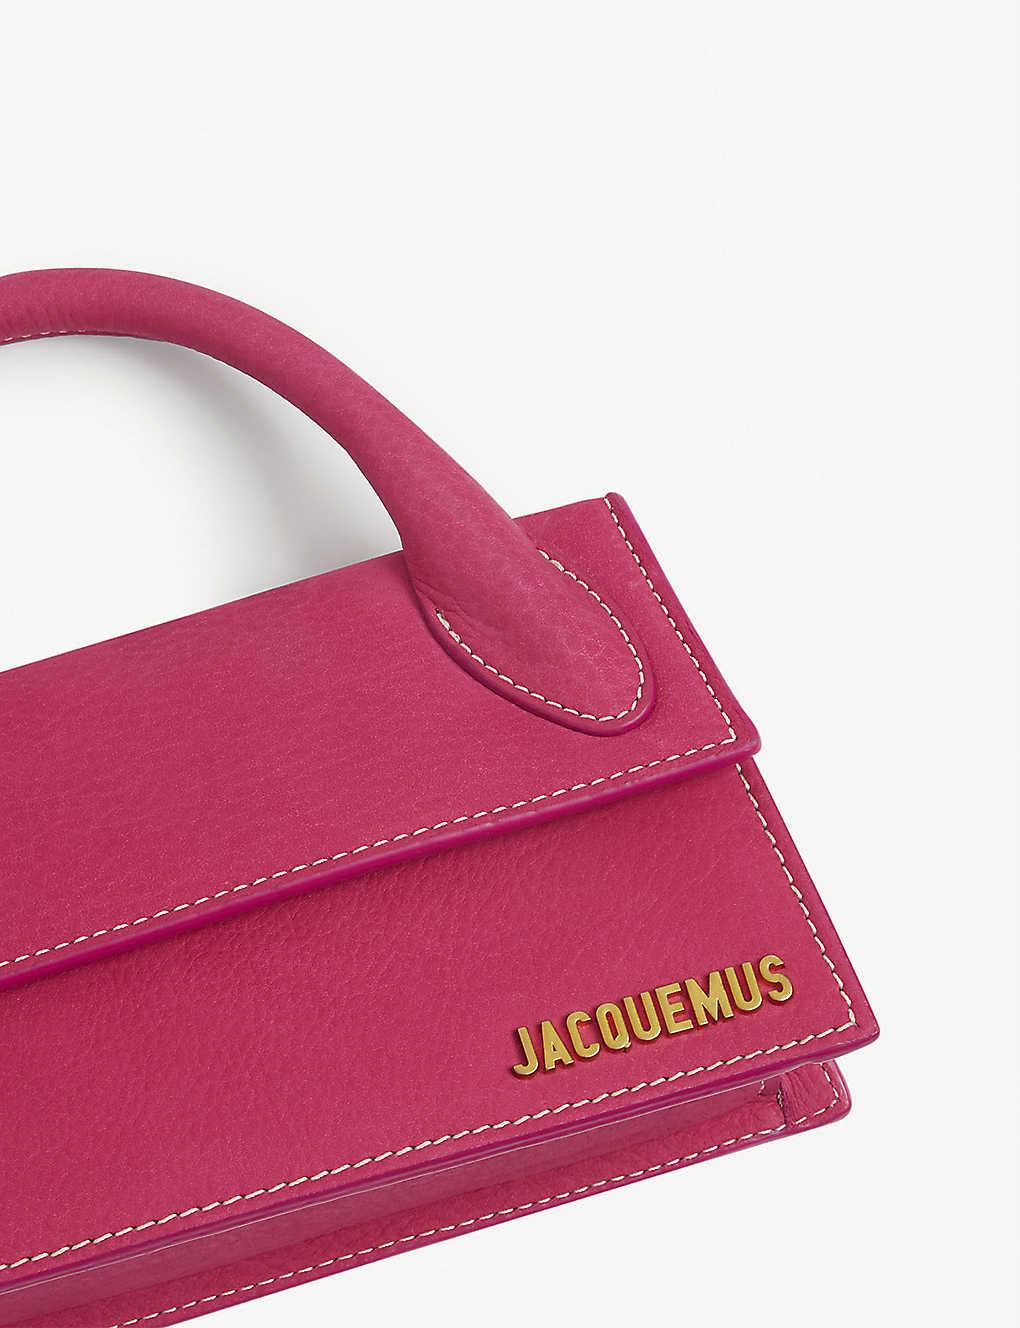 Jacquemus Le Chiquito Long Suede Top Handle Bag in Pink | Lyst